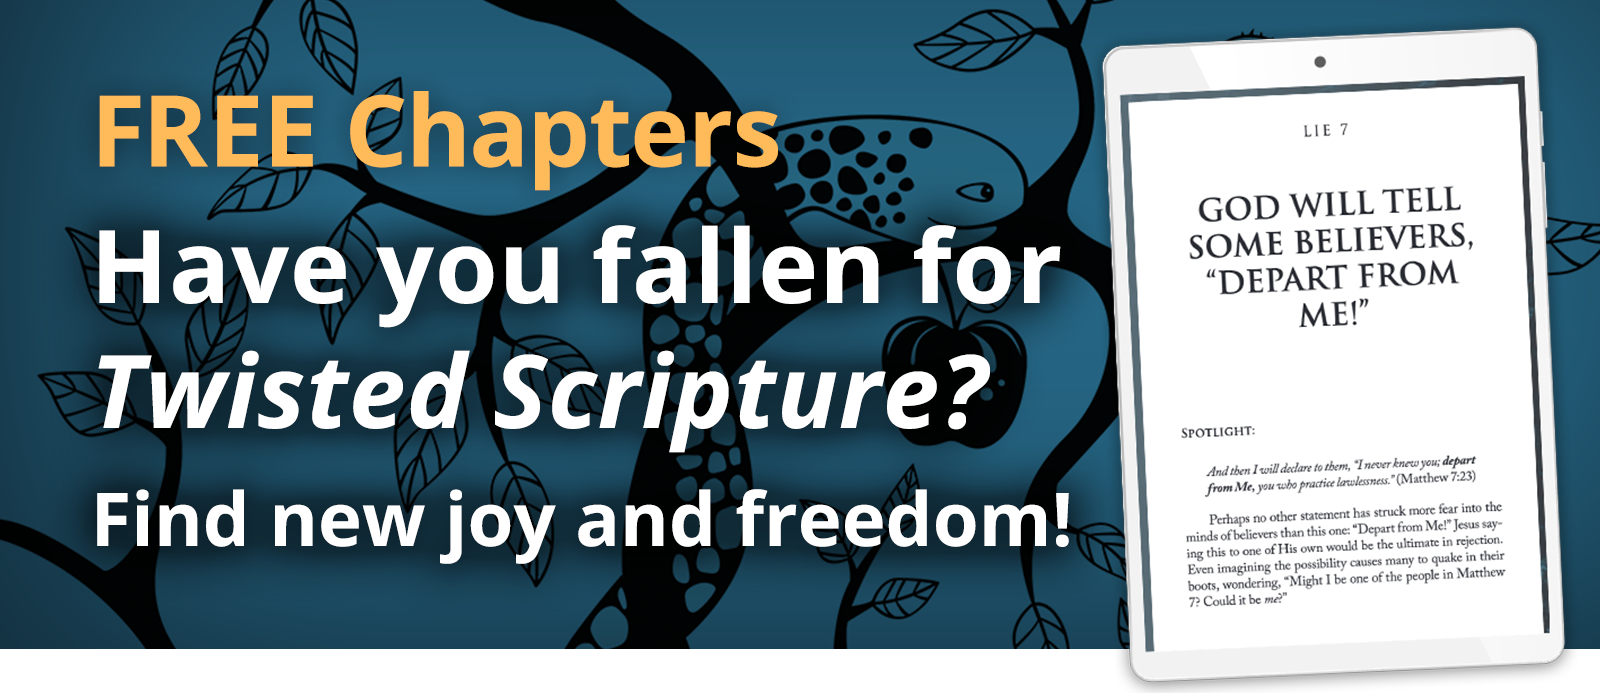 FREE Chapters - Have you fallen for 'Twisted Scripture'? Find new joy and freedom!